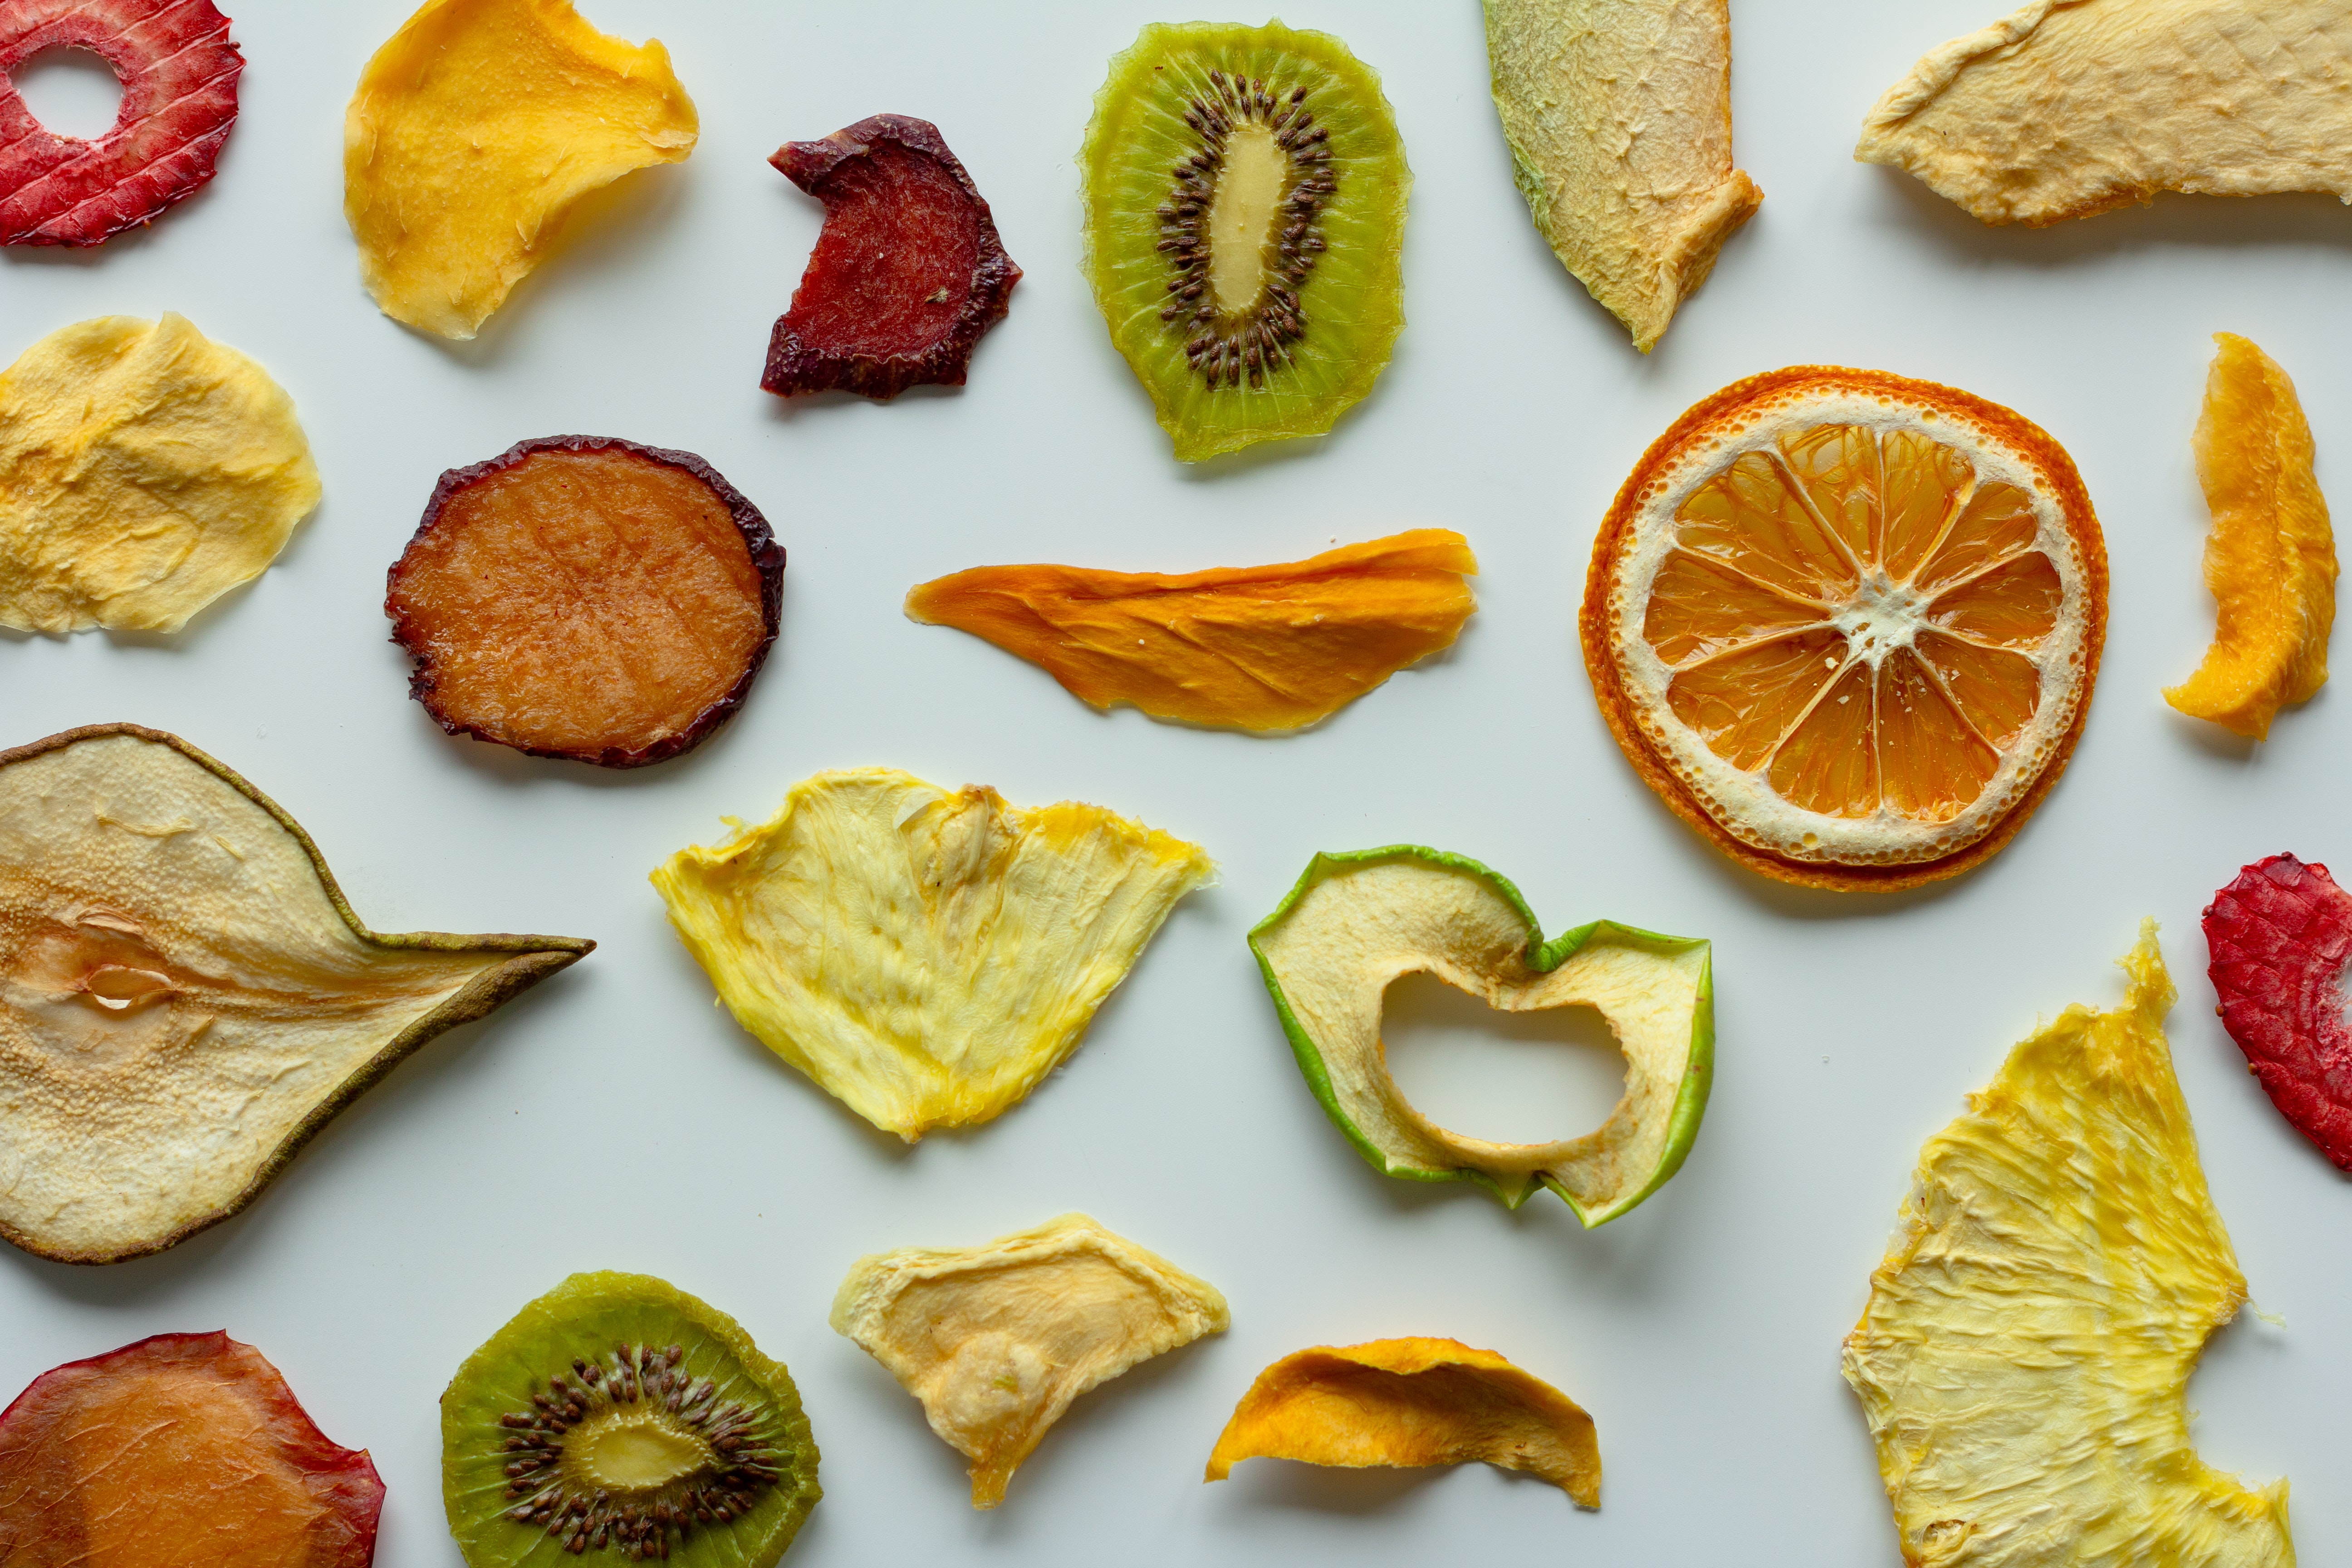 Dehydrating Fruit, How to dry 6 fruits for snacking and storing.